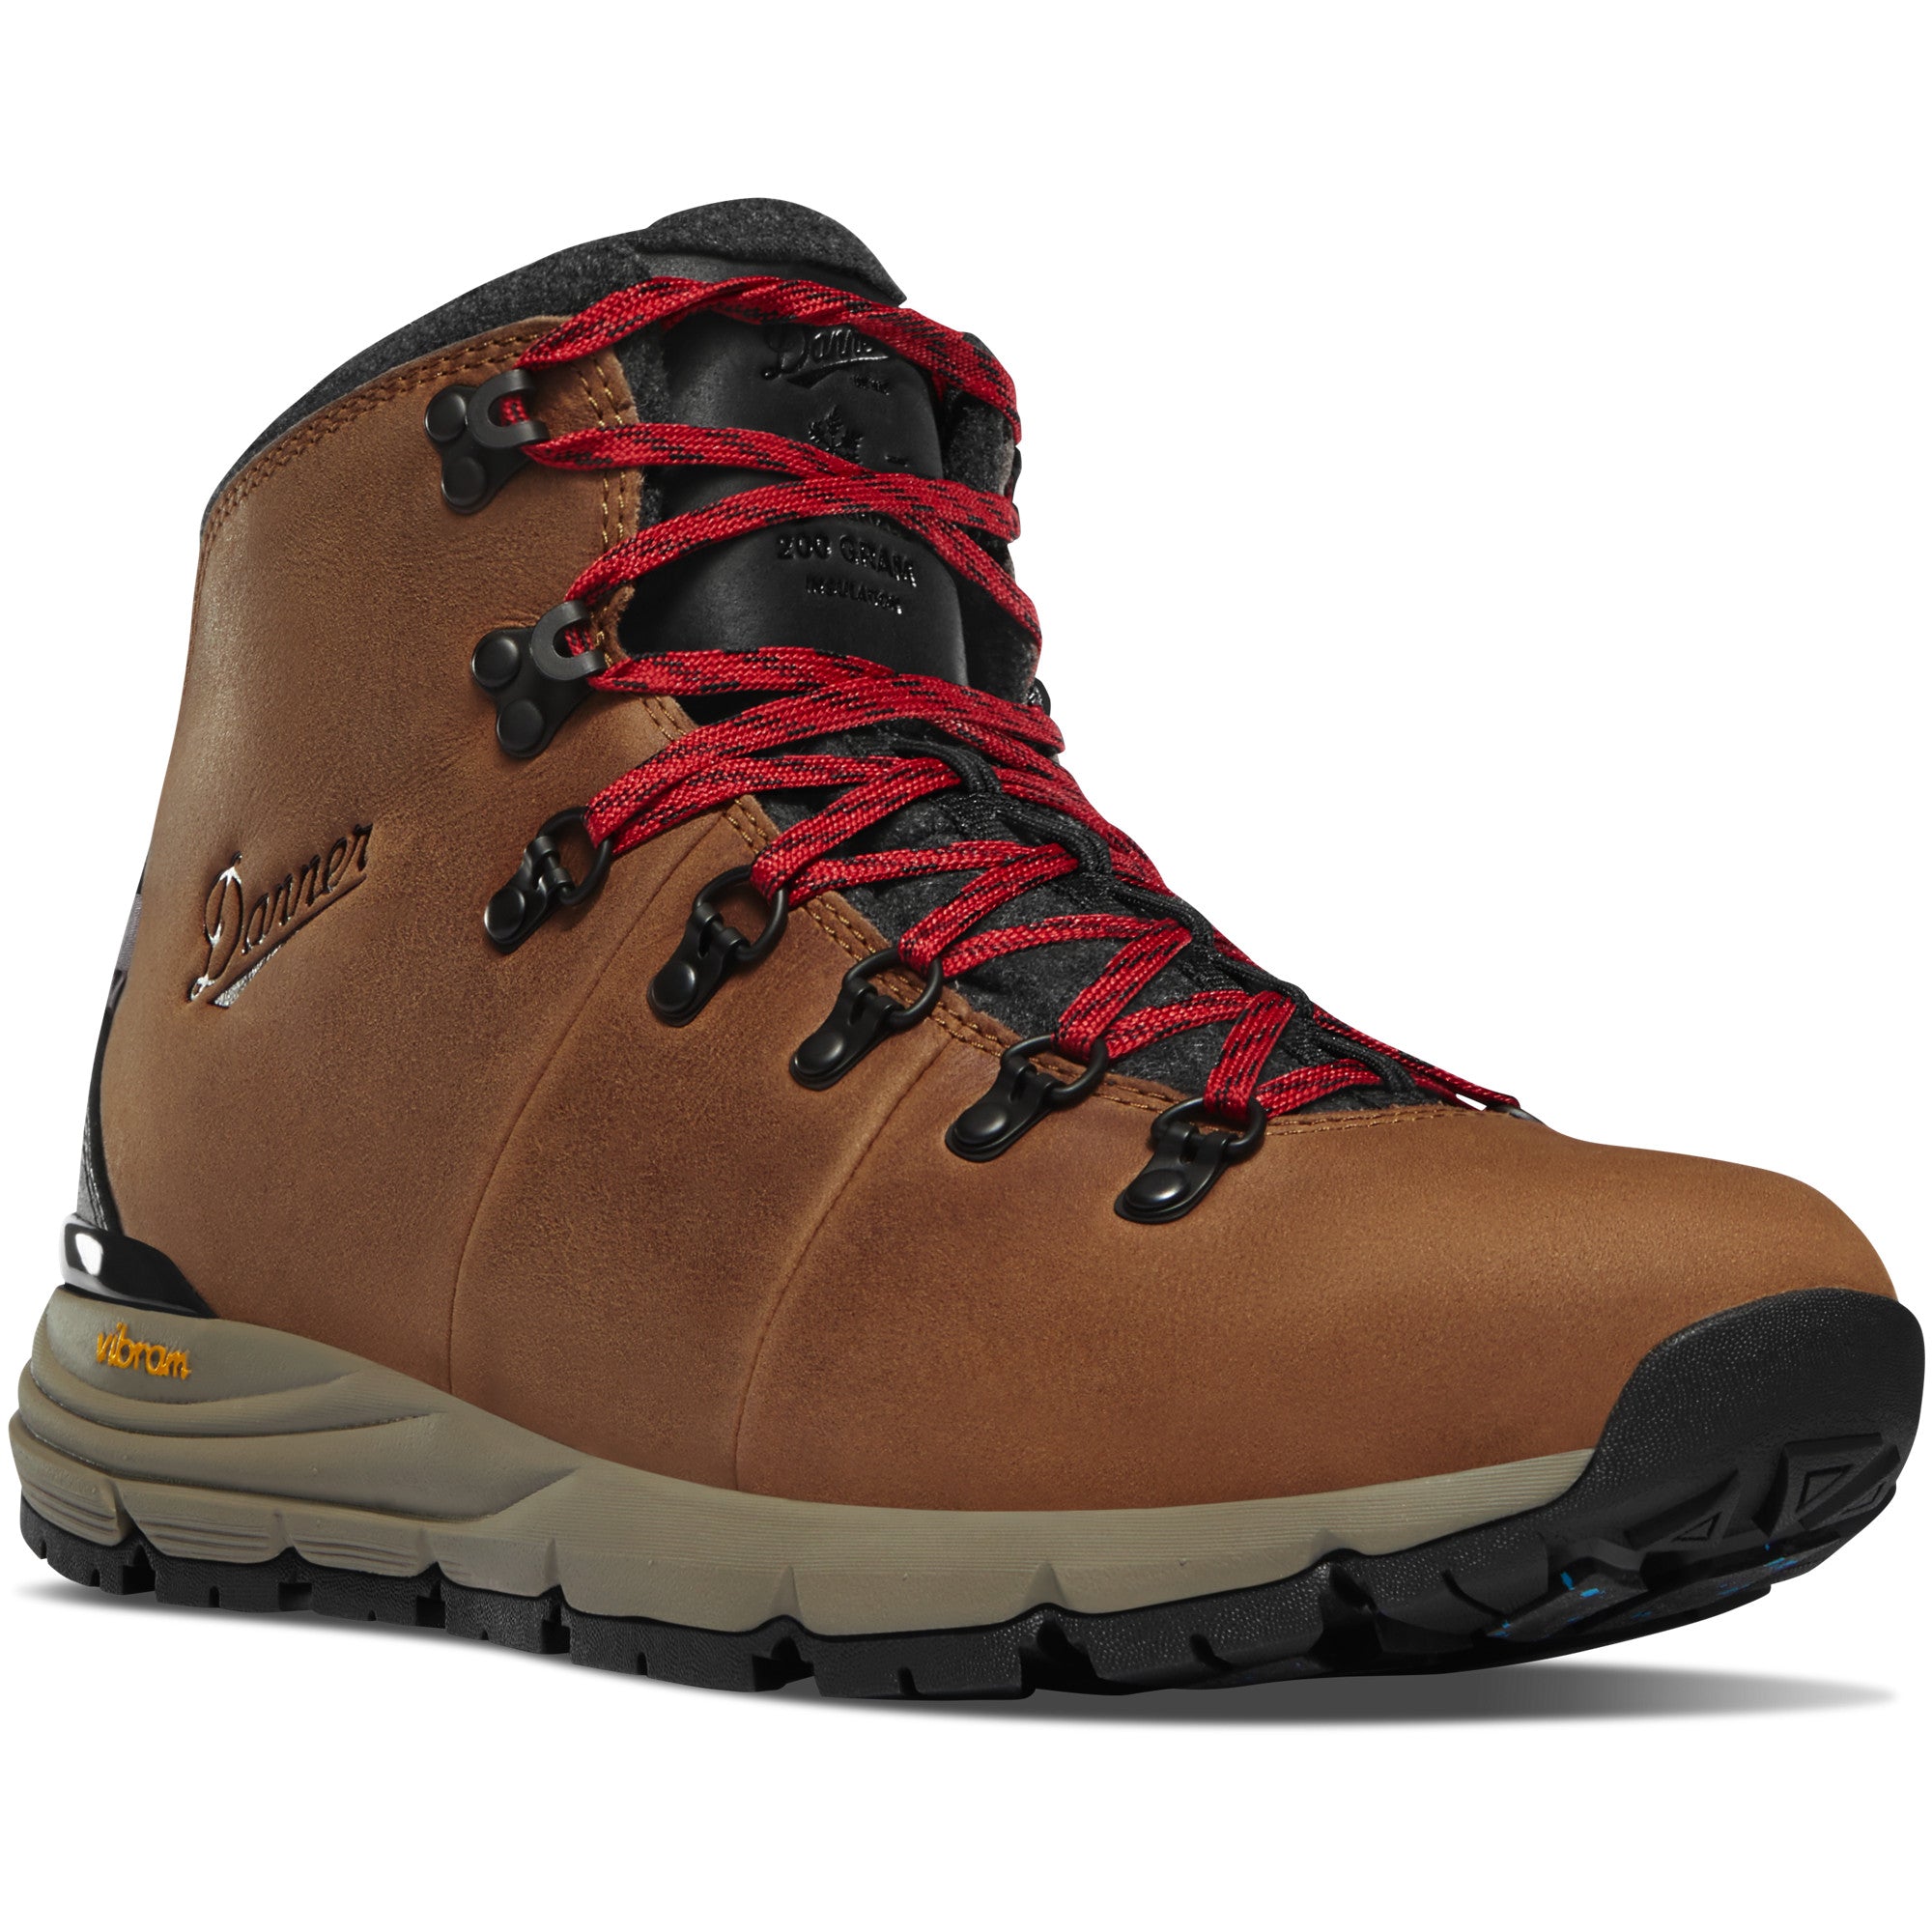 Danner Men's Mountain 600 4.5" 200G Waterproof Hiking Boot in Brown/Red from the side